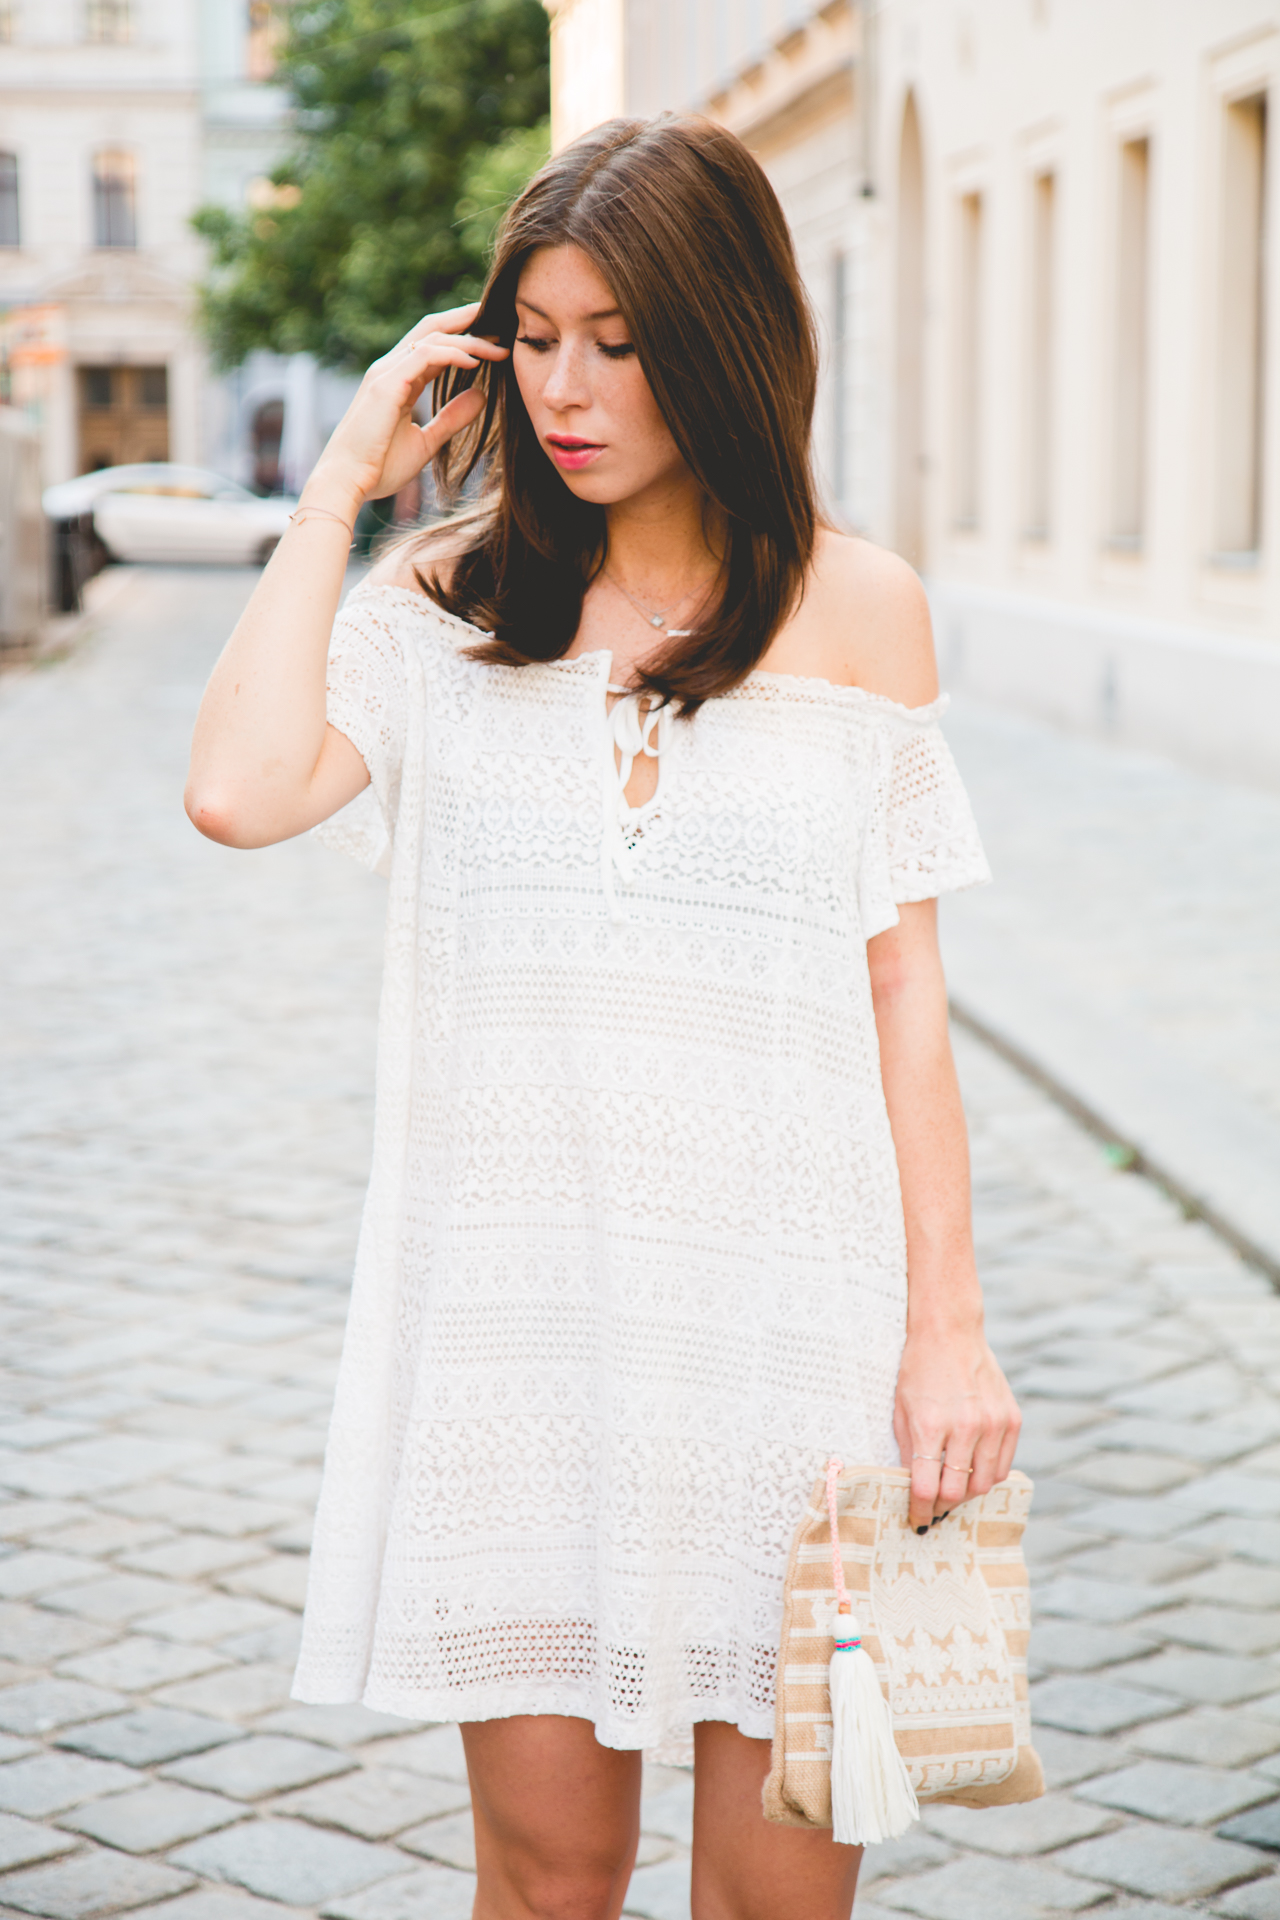 OUTFIT: a summery dress